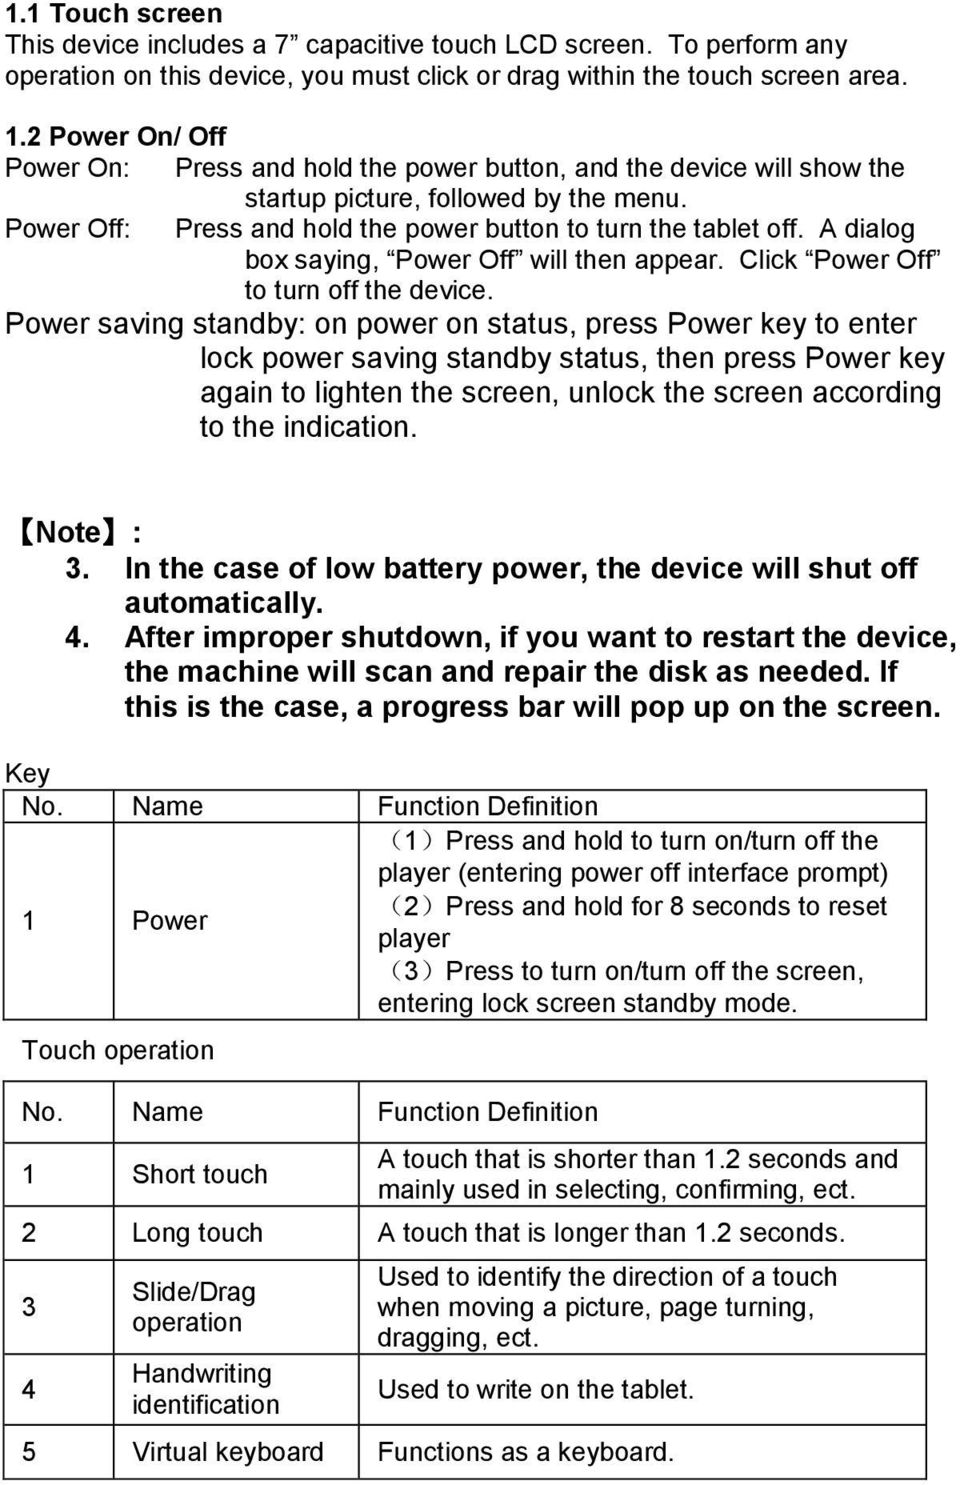 Power saving standby: on power on status, press Power key to enter lock power saving standby status, then press Power key again to lighten the screen, unlock the screen according to the indication.